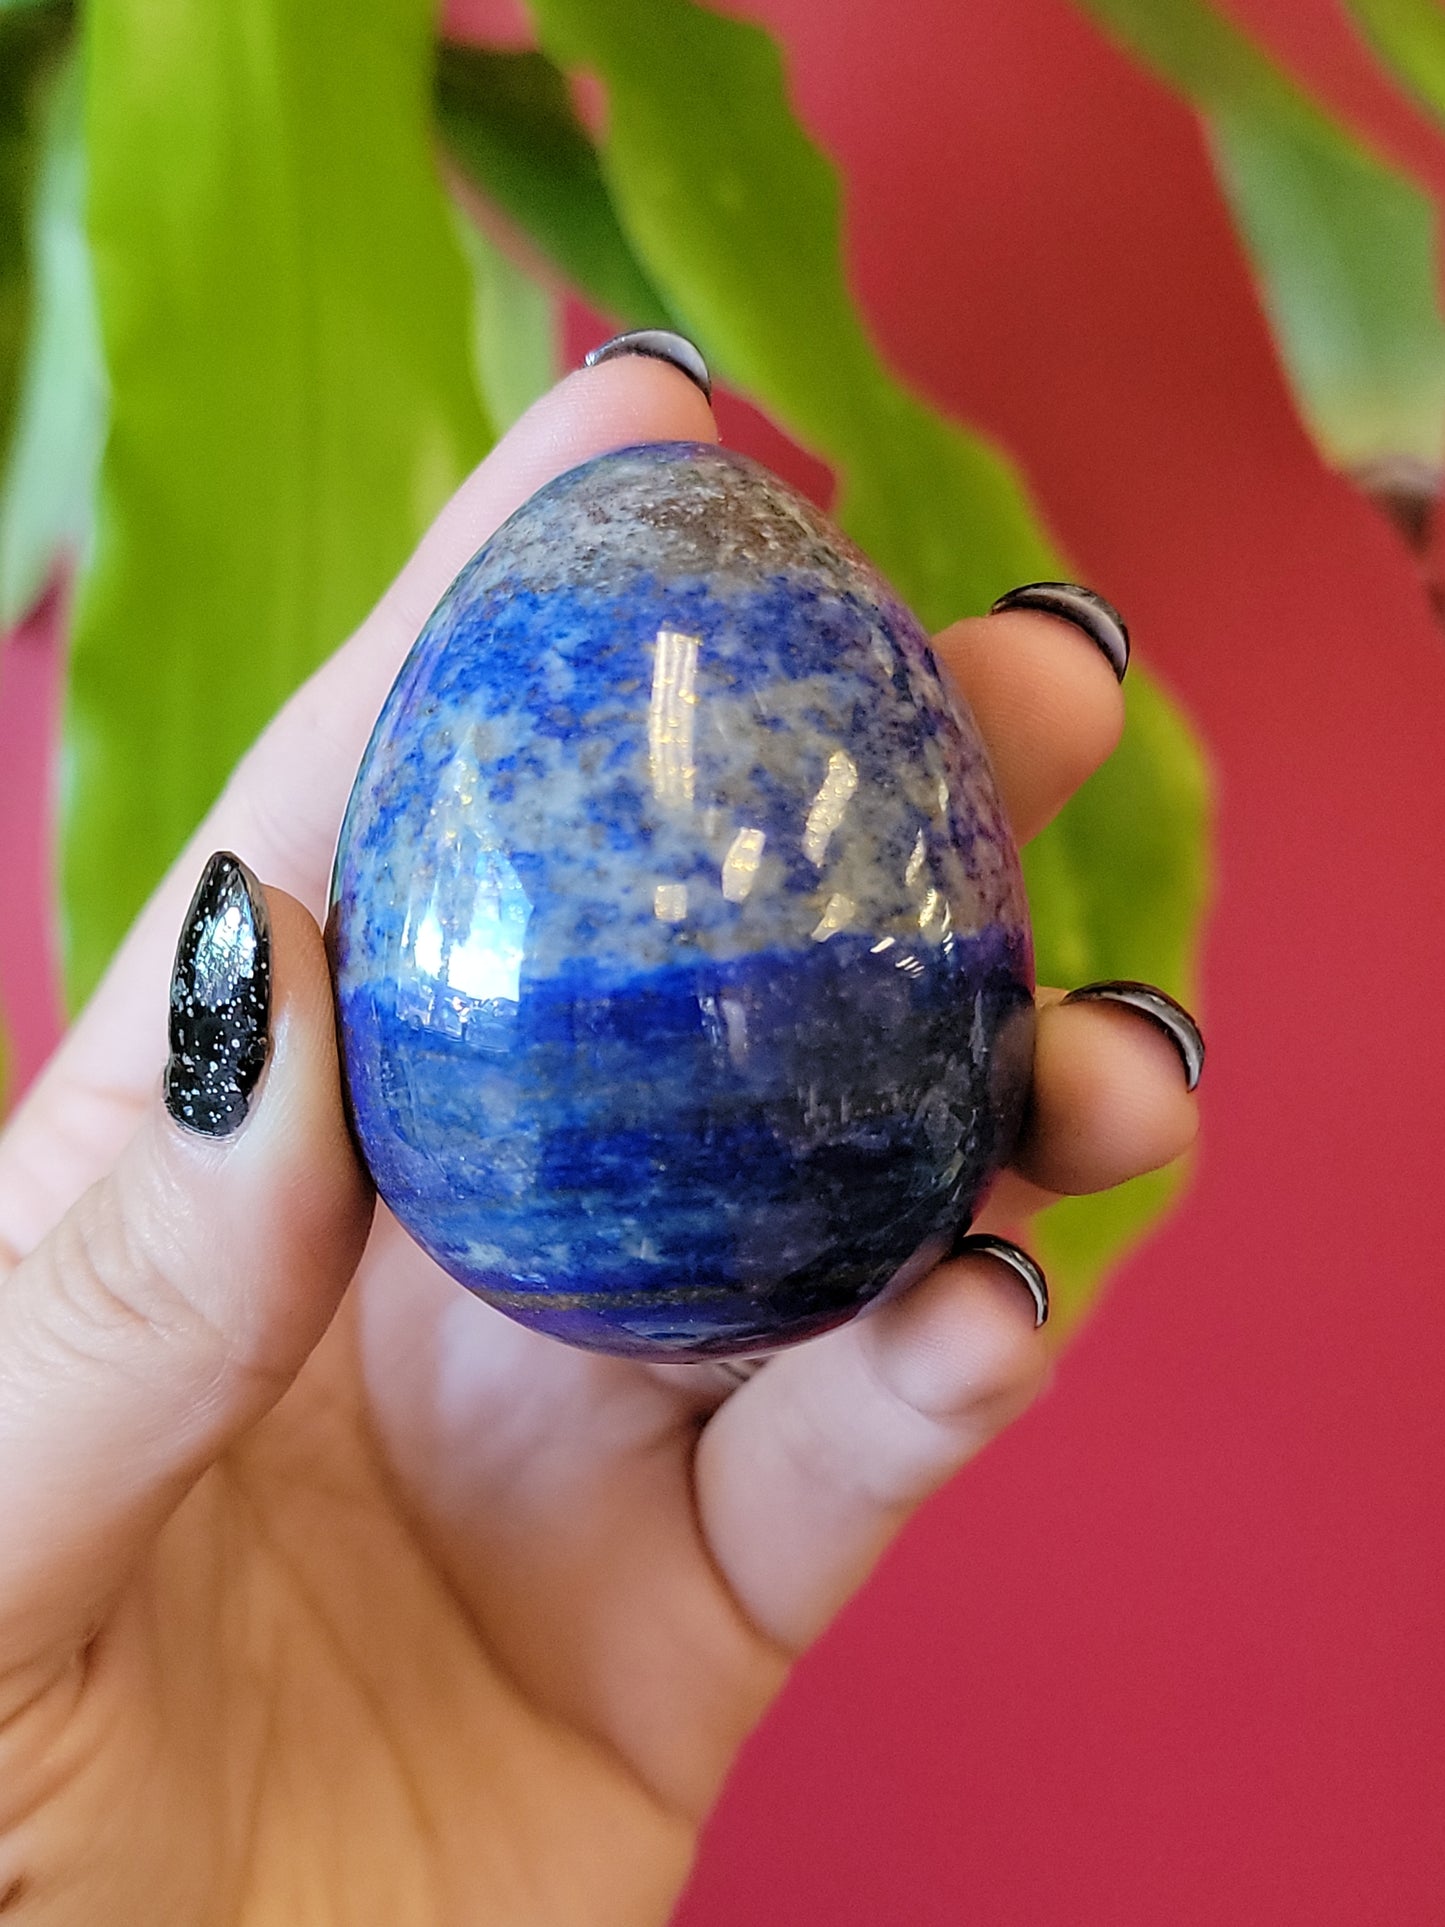 Lapis lazuli eggs available at wholesale and retail prices, only at our crystal shop in San Diego!